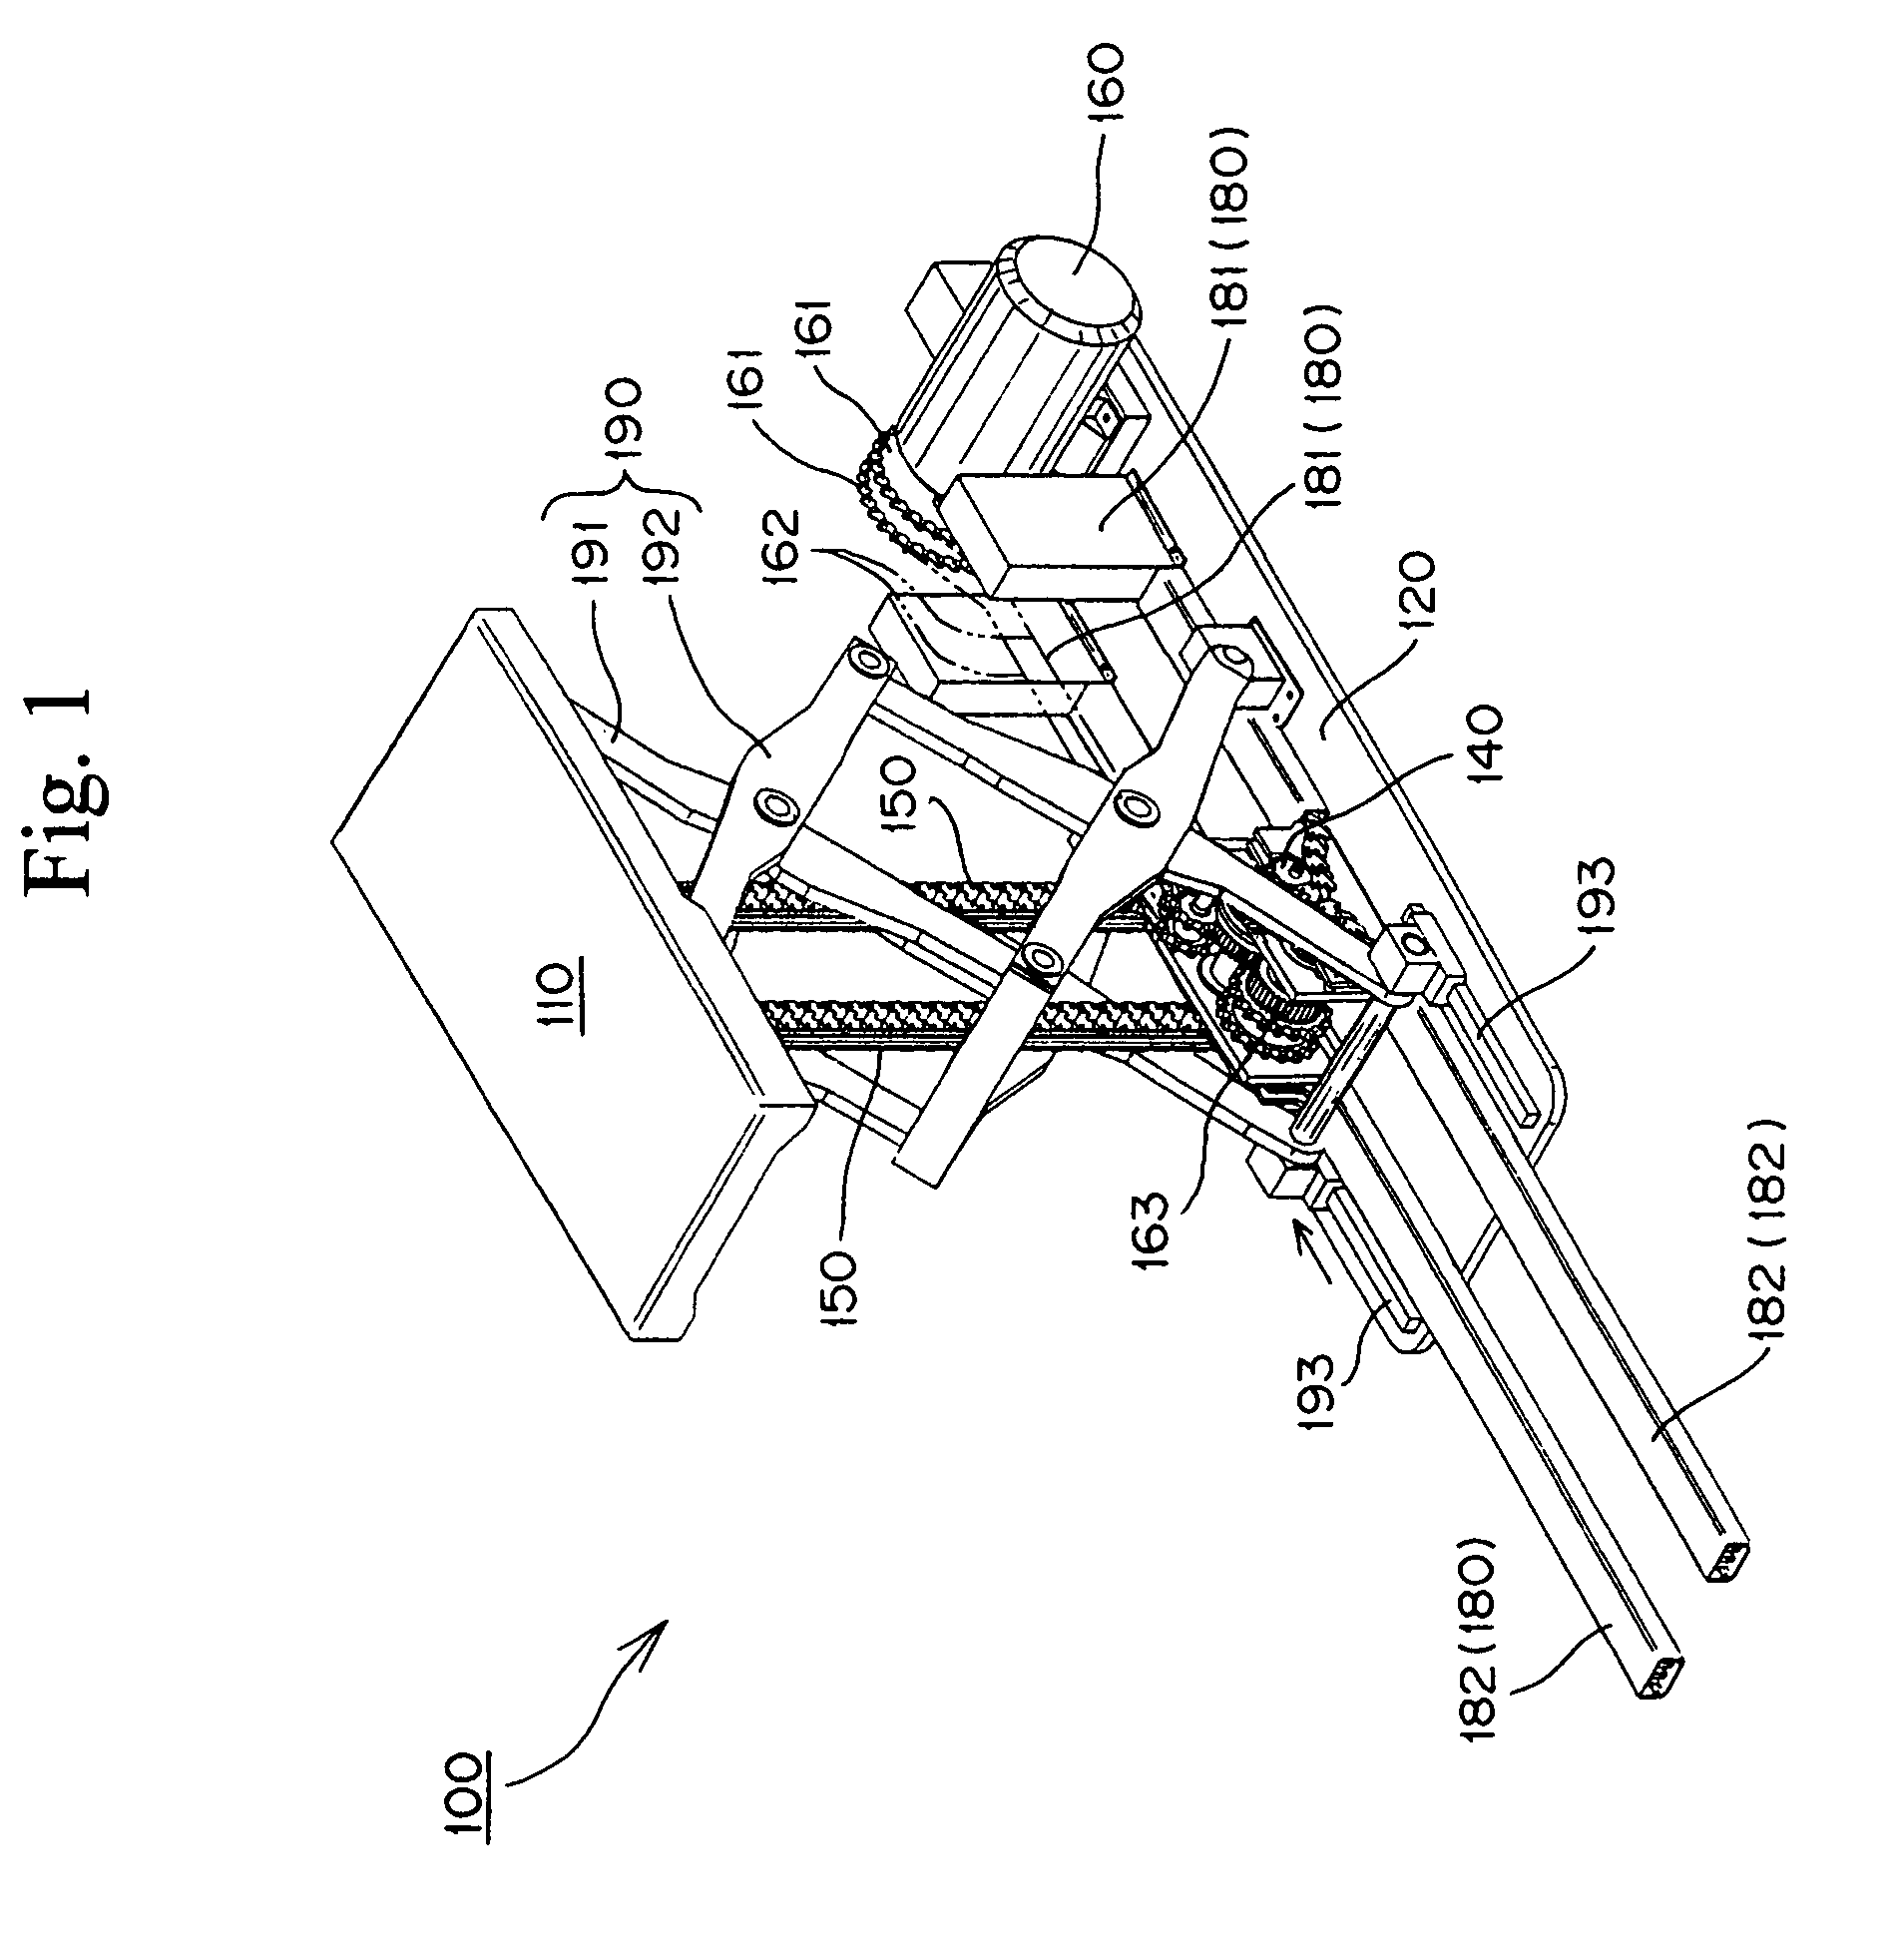 Hoisting and lowering device having engagement chains